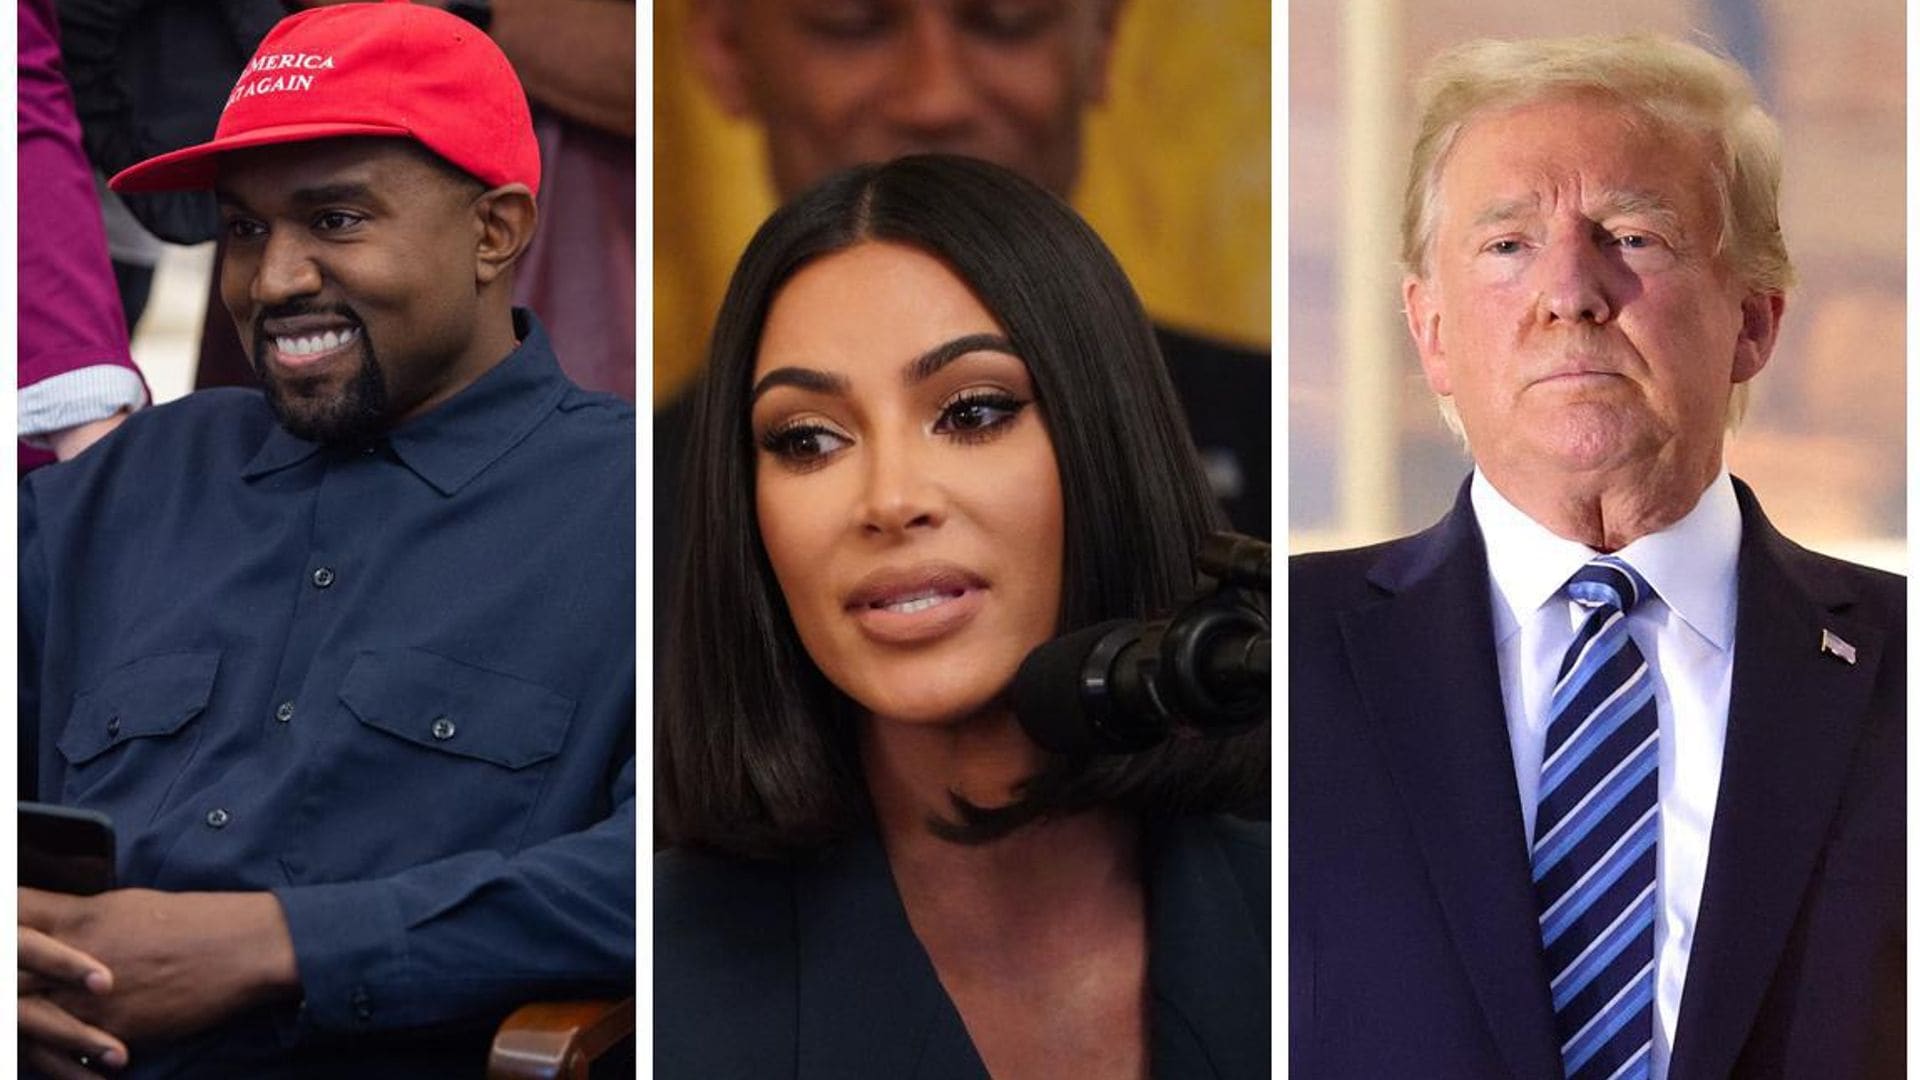 Fans want to know who Kim Kardashian voted for